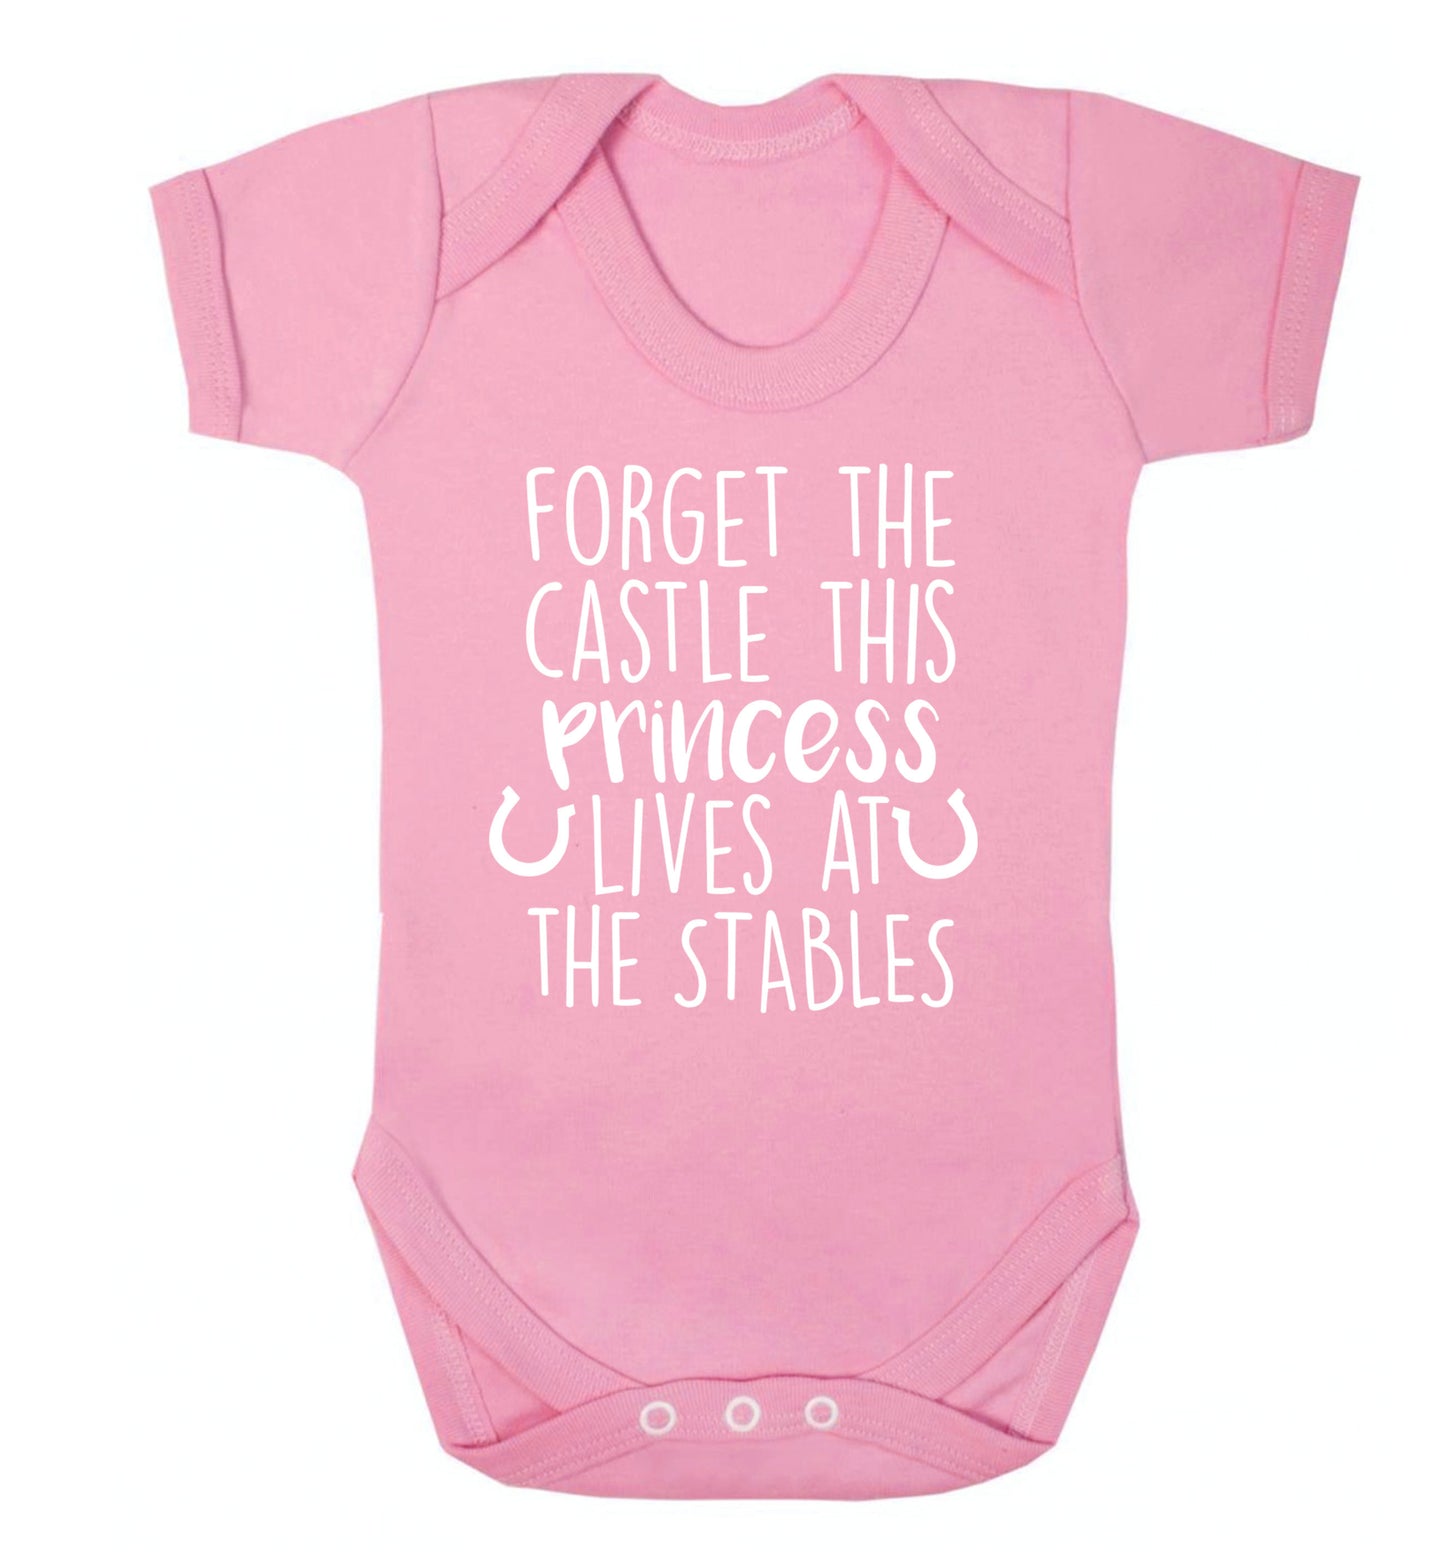 Forget the castle this princess lives at the stables Baby Vest pale pink 18-24 months